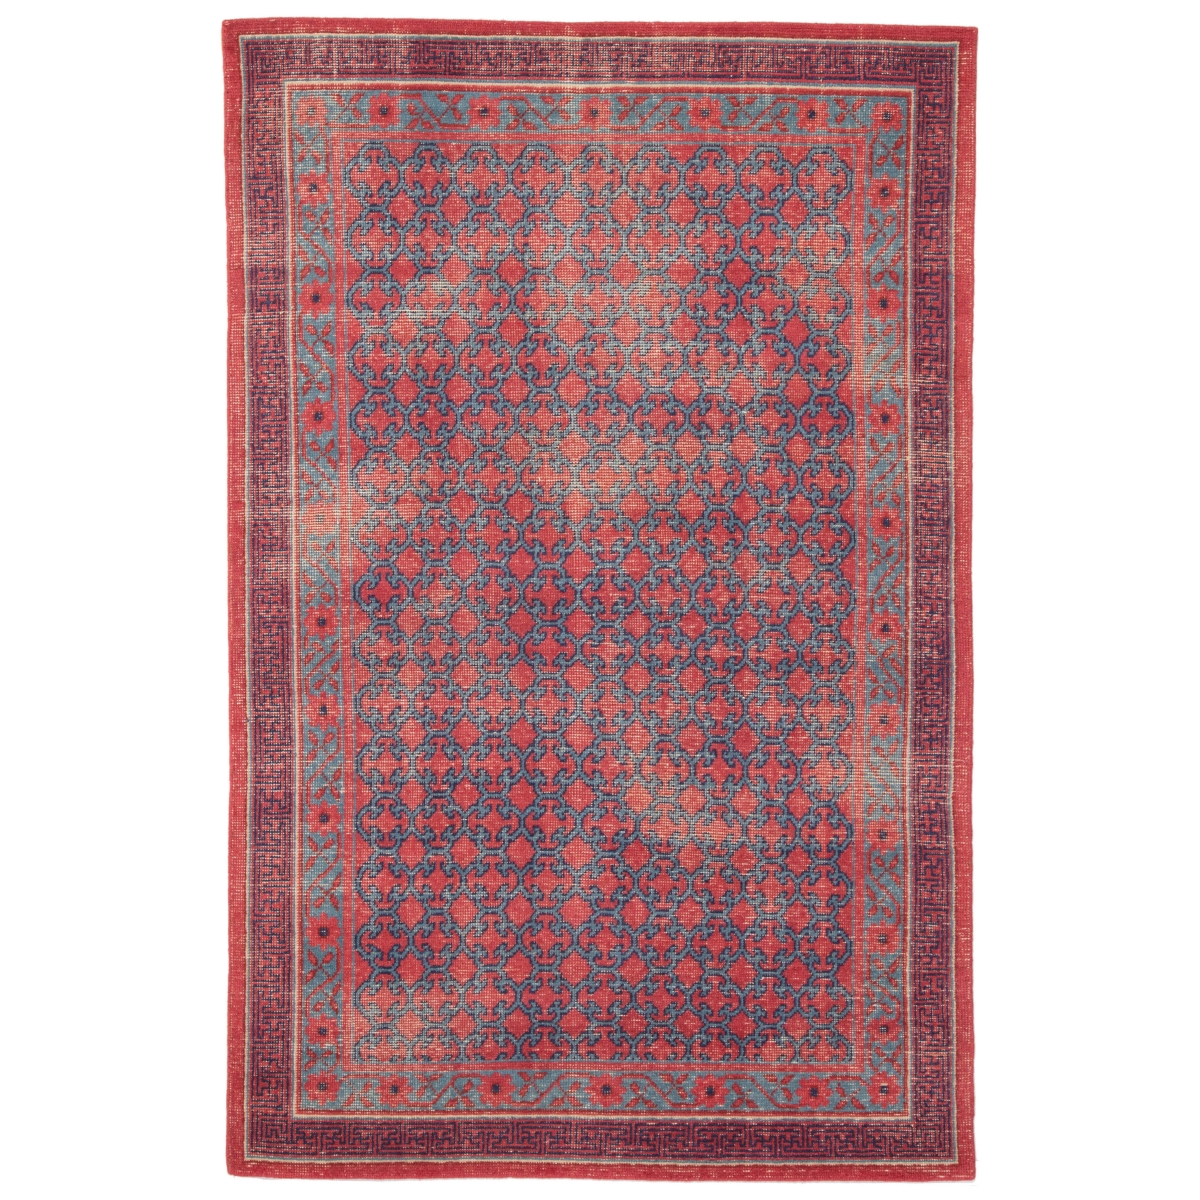 Rug135455 10 X 14 Ft. Revolution Concord Hand-knotted Medallion Red & Blue Area Rug